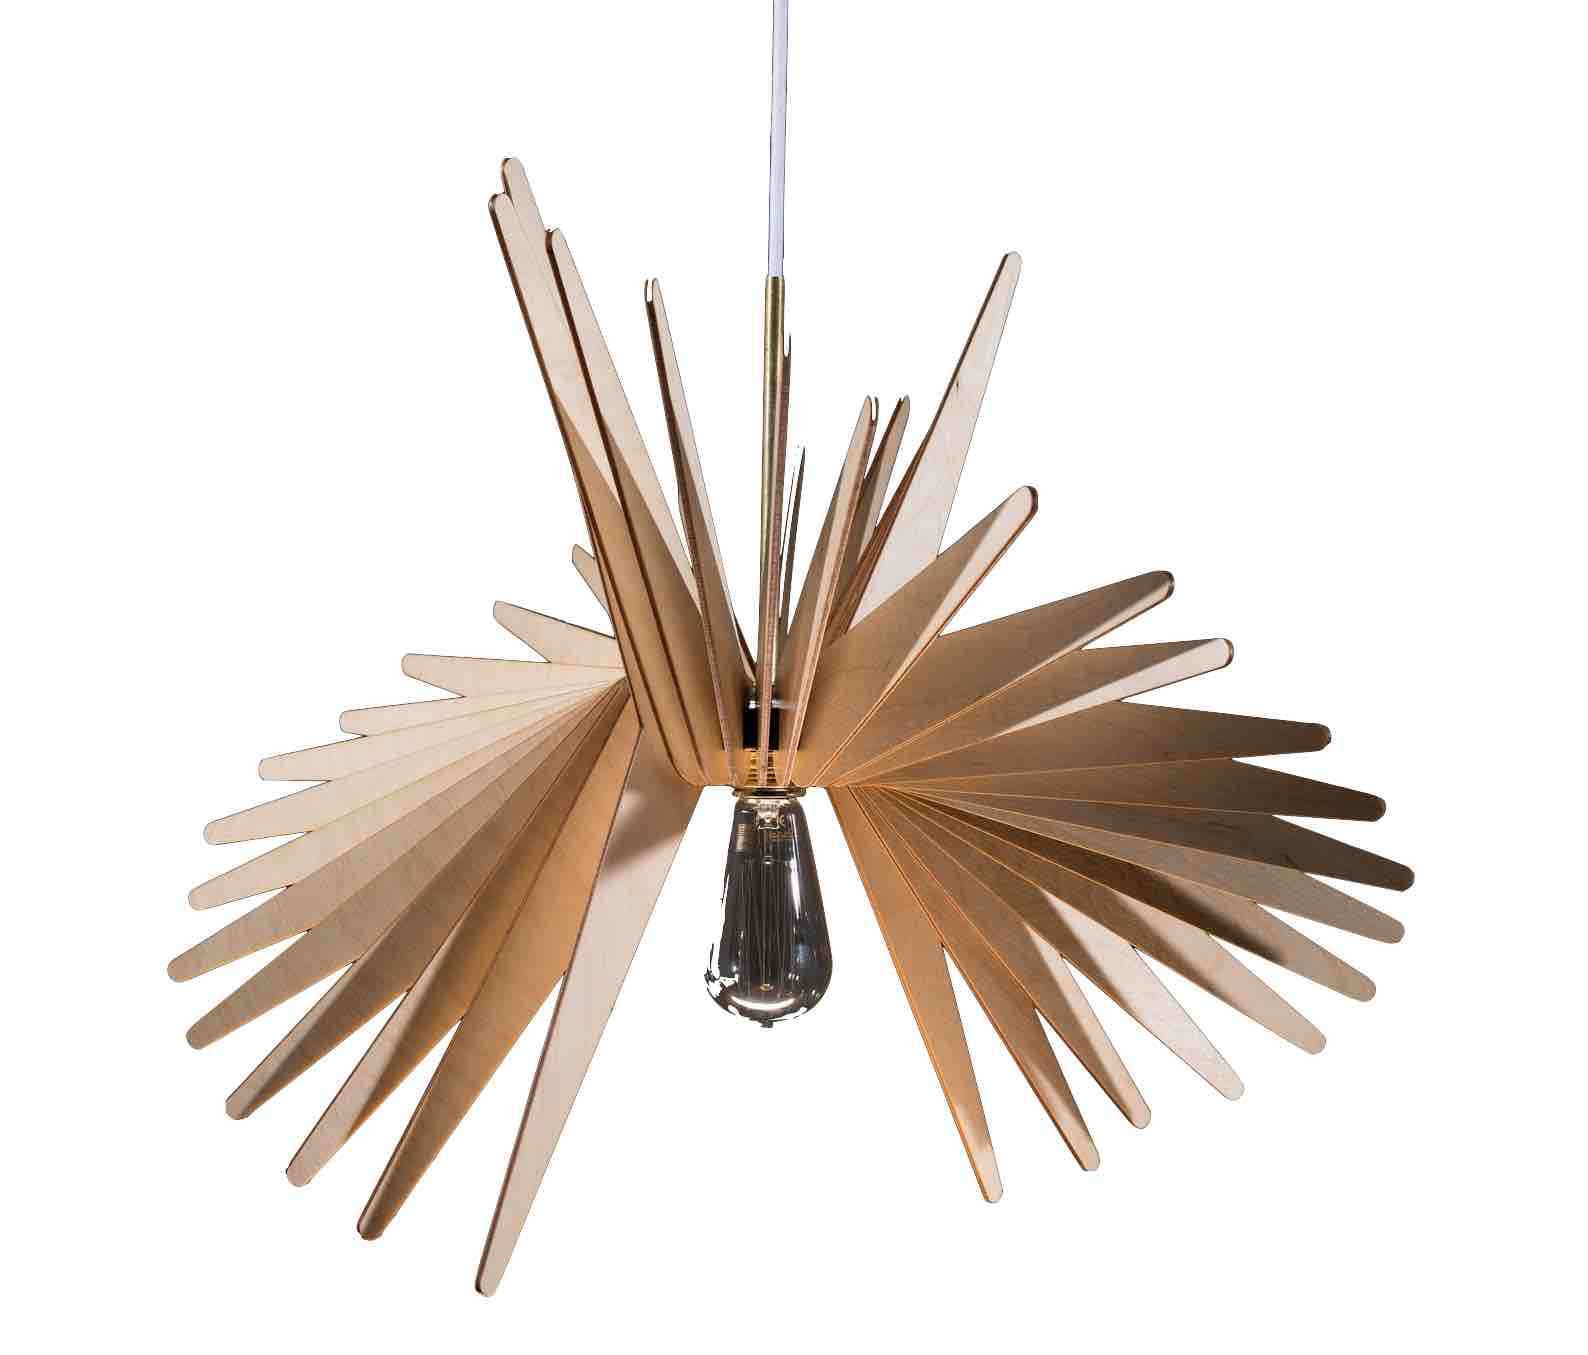 An artsy wooden pendant lamp that is much too expensive